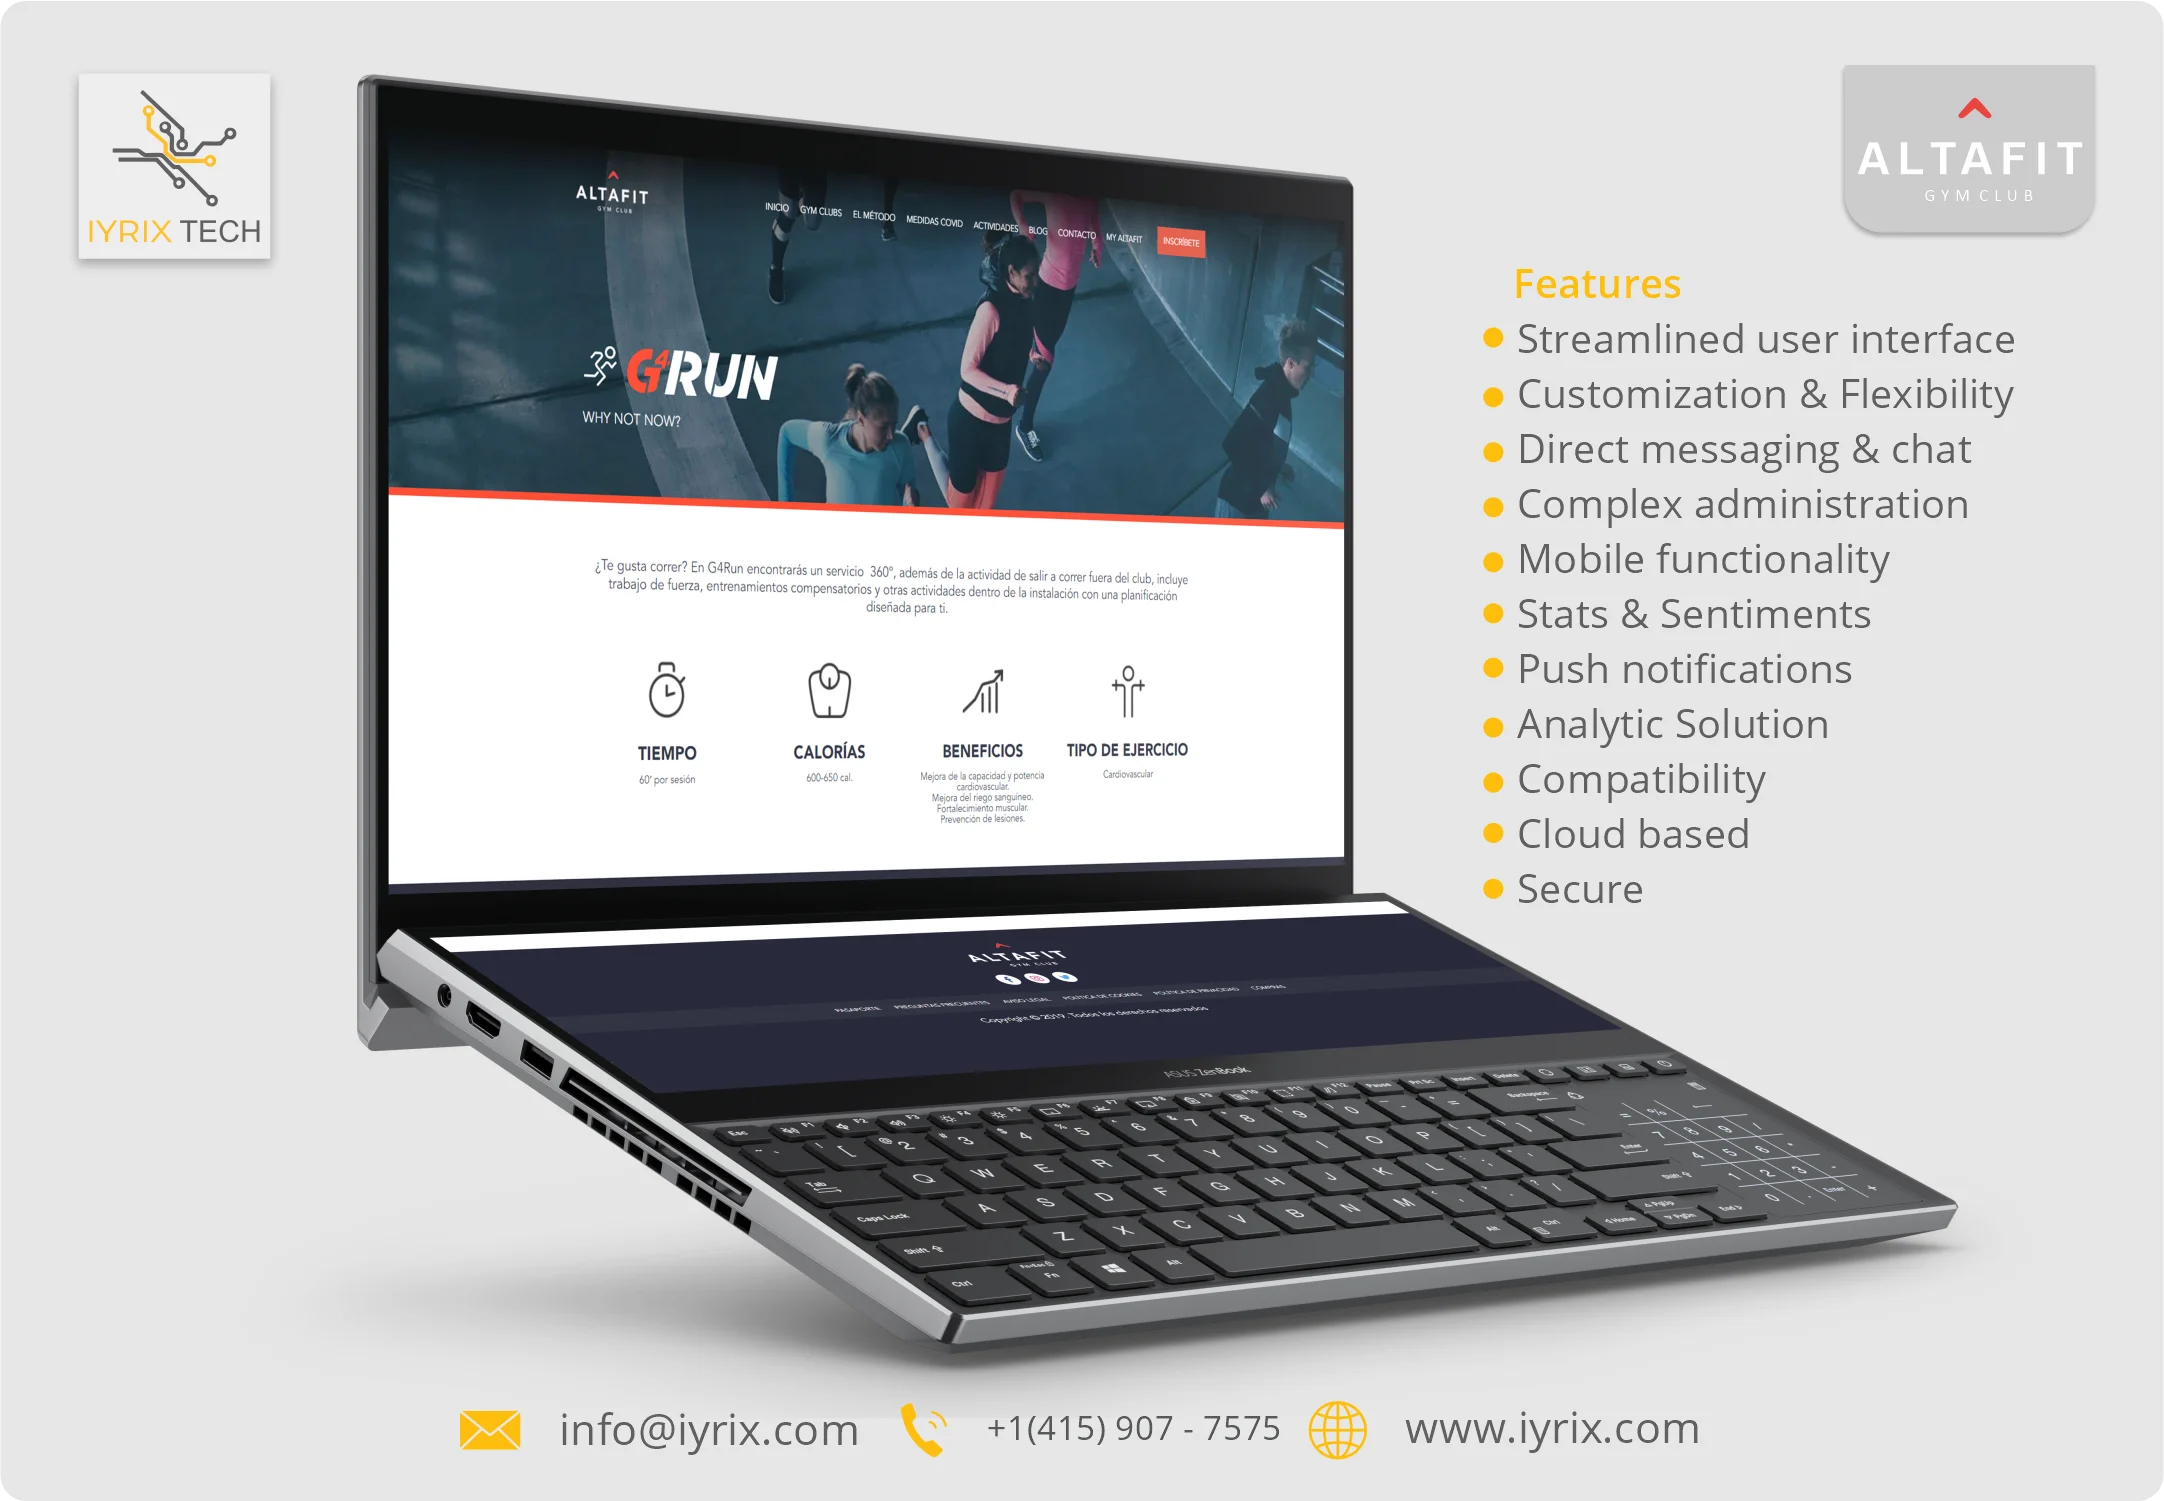 Web
                                                                Streamlined user interface
                                                                Customization & Flexibility
                                                                Direct messaging & chat
                                                                Complex administration
                                                                Mobile functionality
                                                                Stats & Sentiments
                                                                Push notifications
                                                                Analytic Solution
                                                                Compatibility 
                                                                Cloud based
                                                                Secure
                                                                